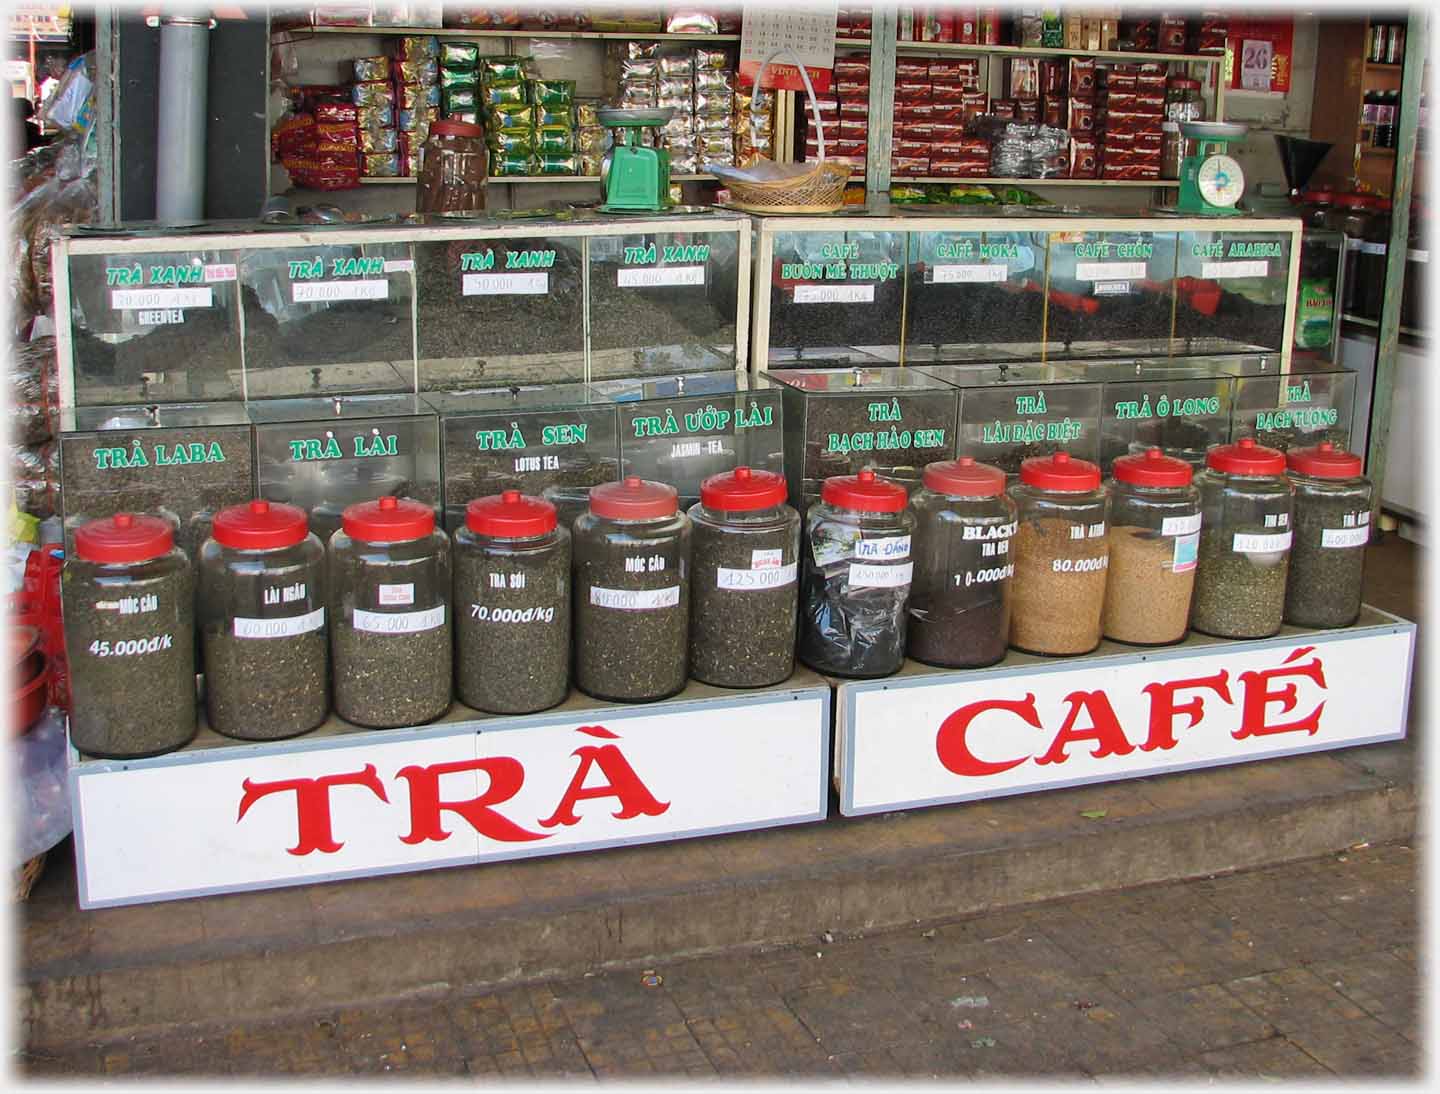 Front of stall with two large words and a dozen glass jars in front of cabinets of tea.